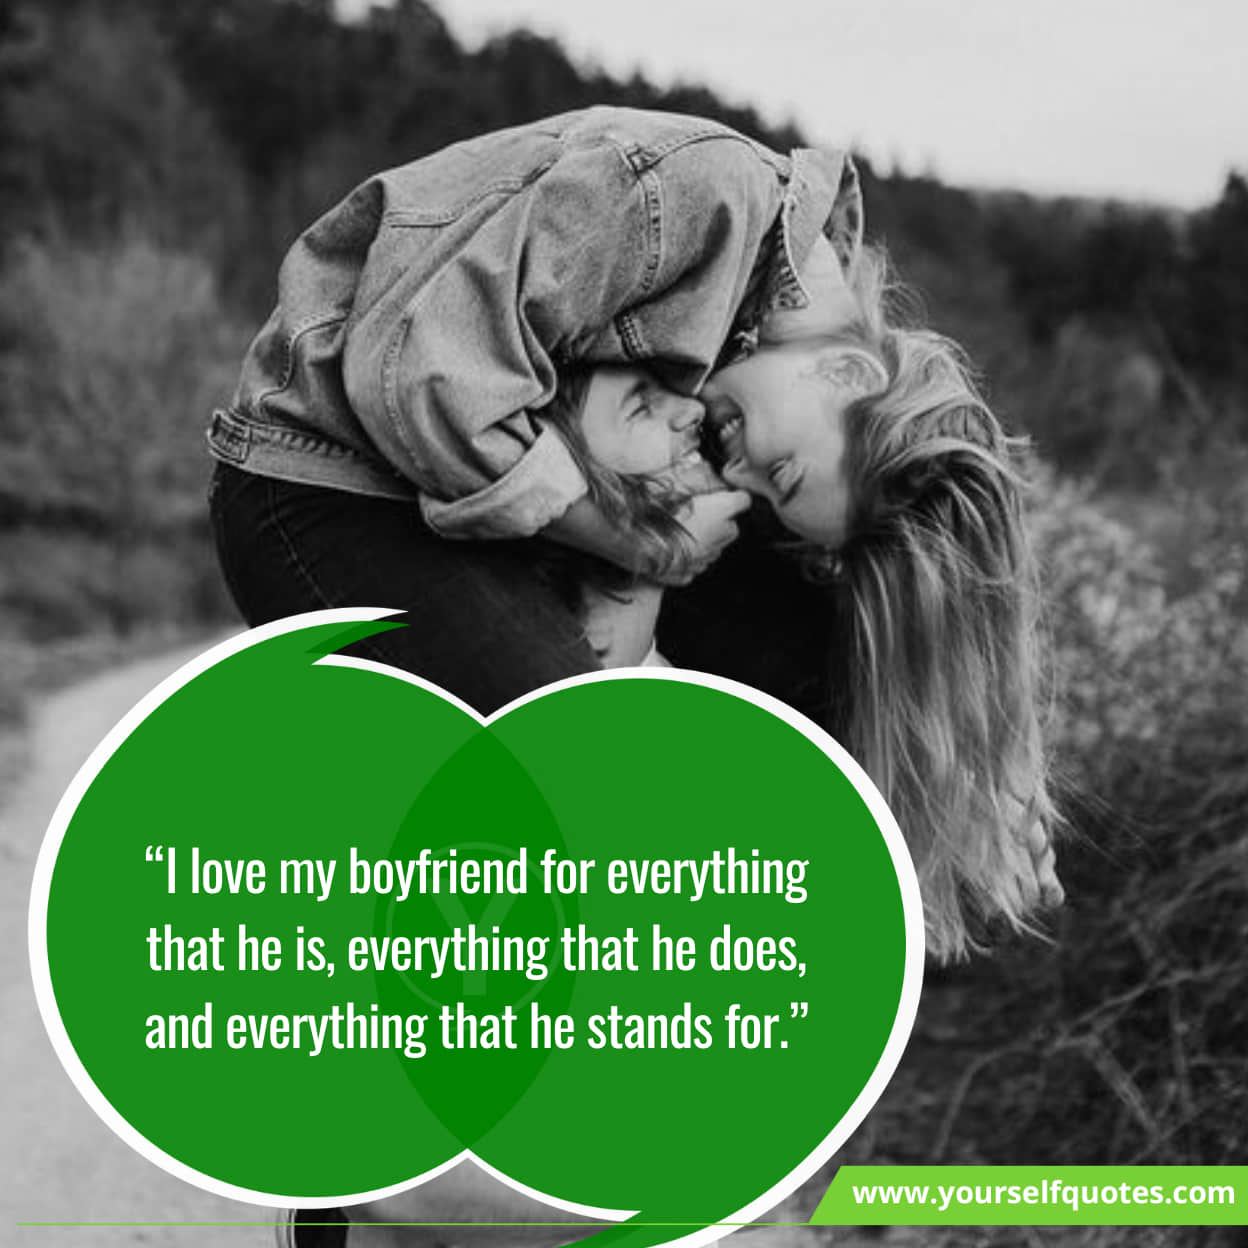 Quotes to express love and affection to your boyfriend